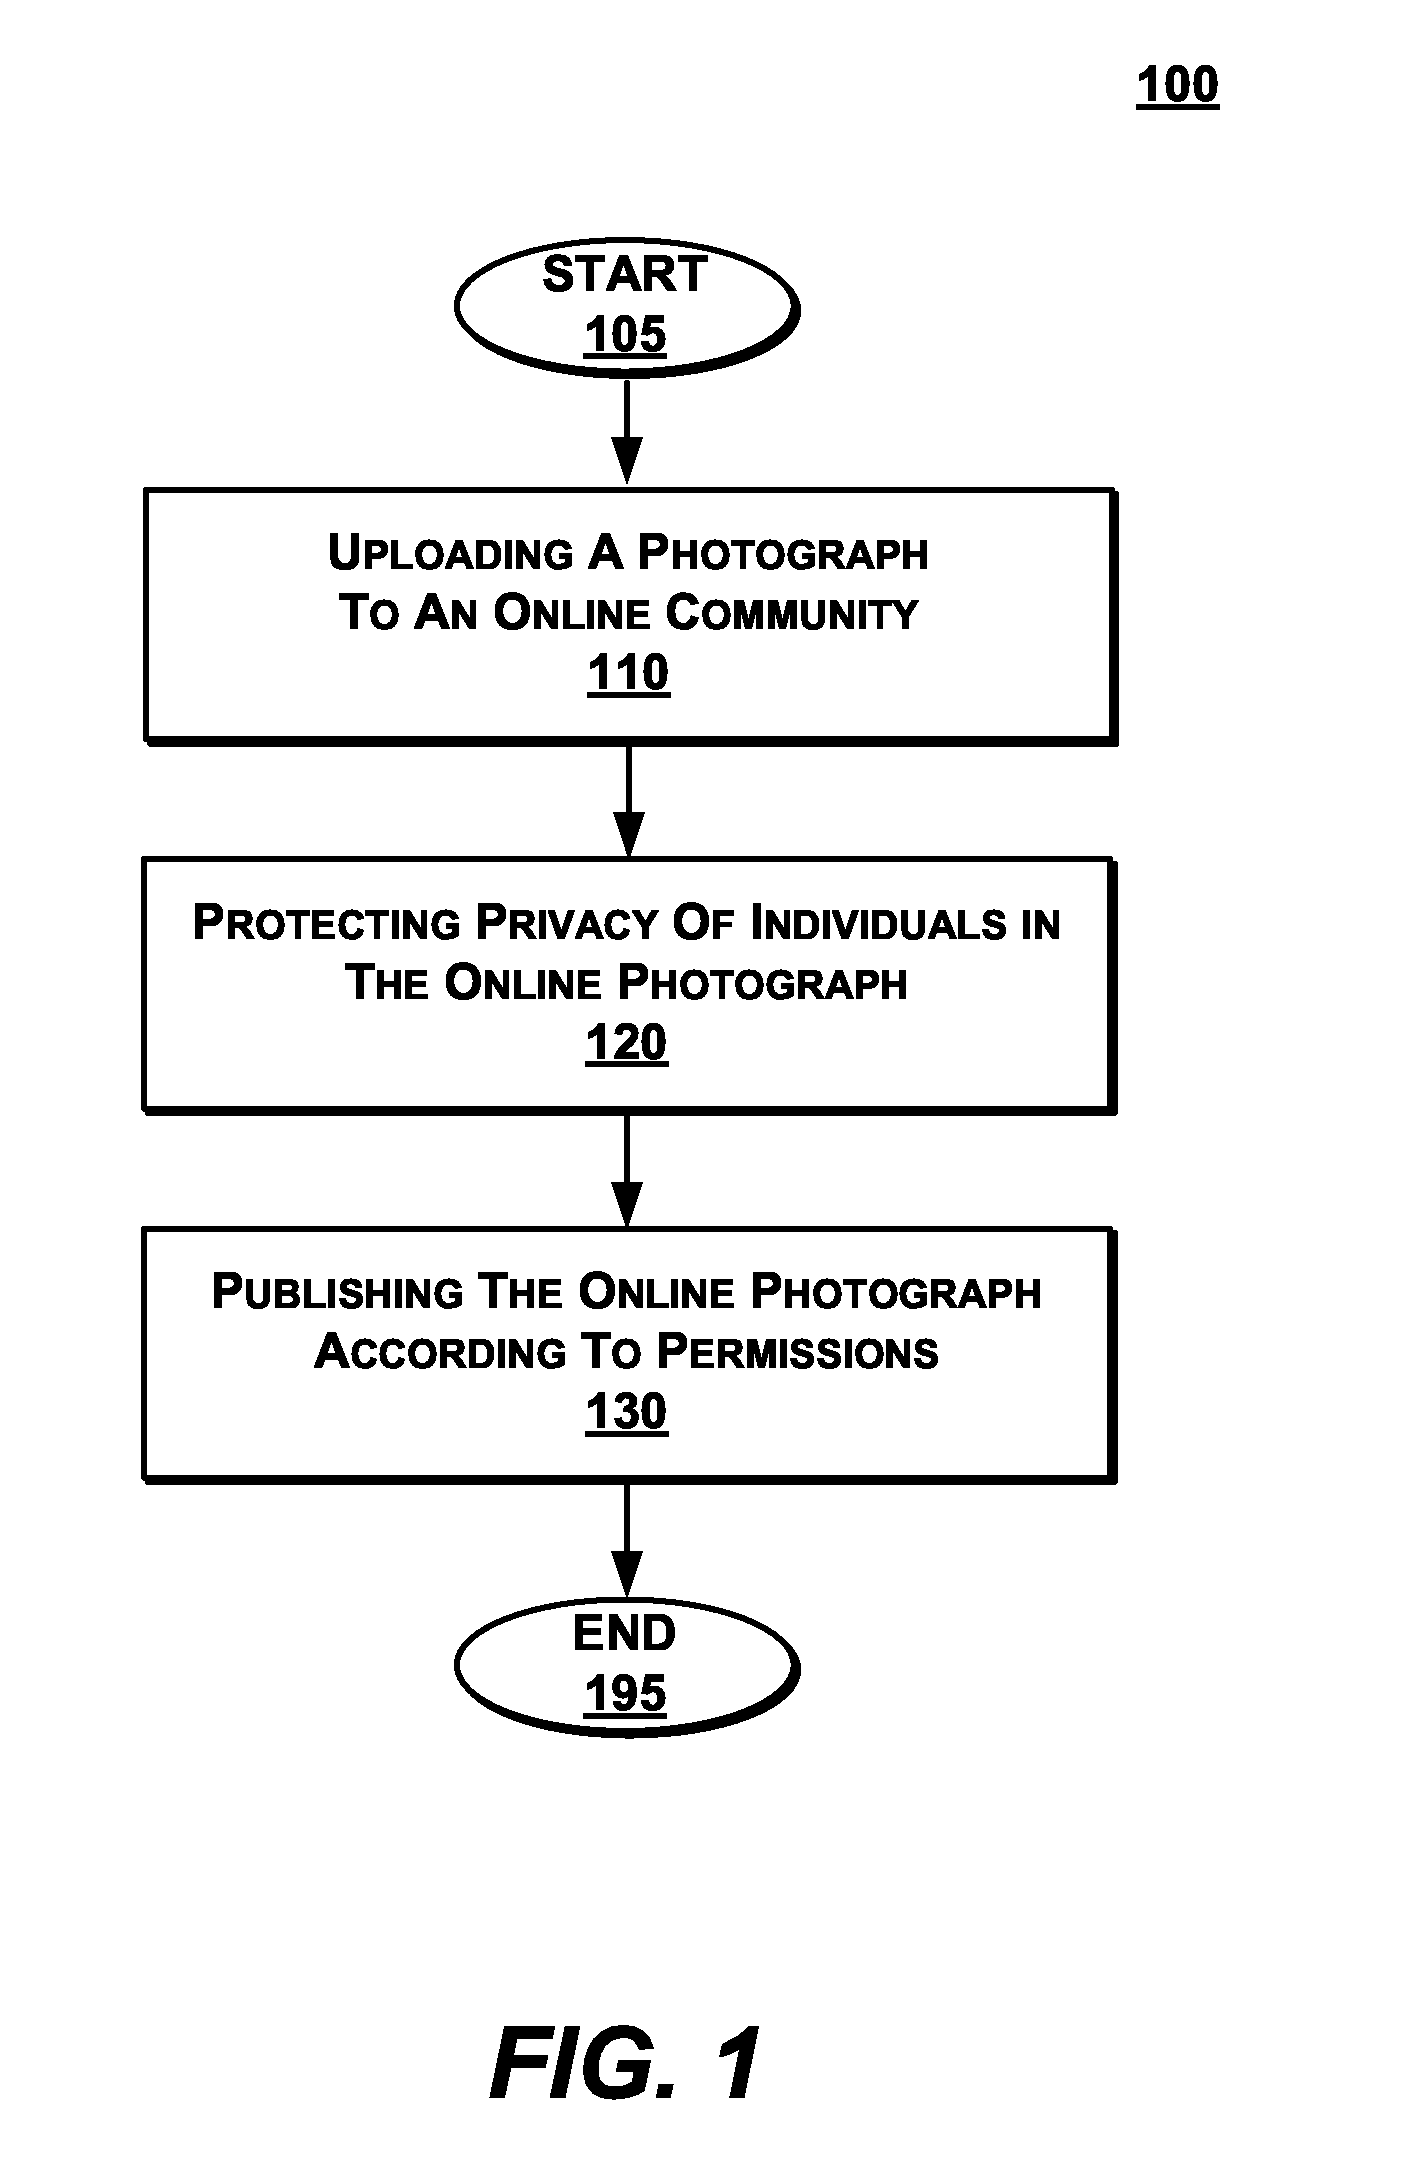 Adding privacy protection to photo uploading/ tagging in social networks